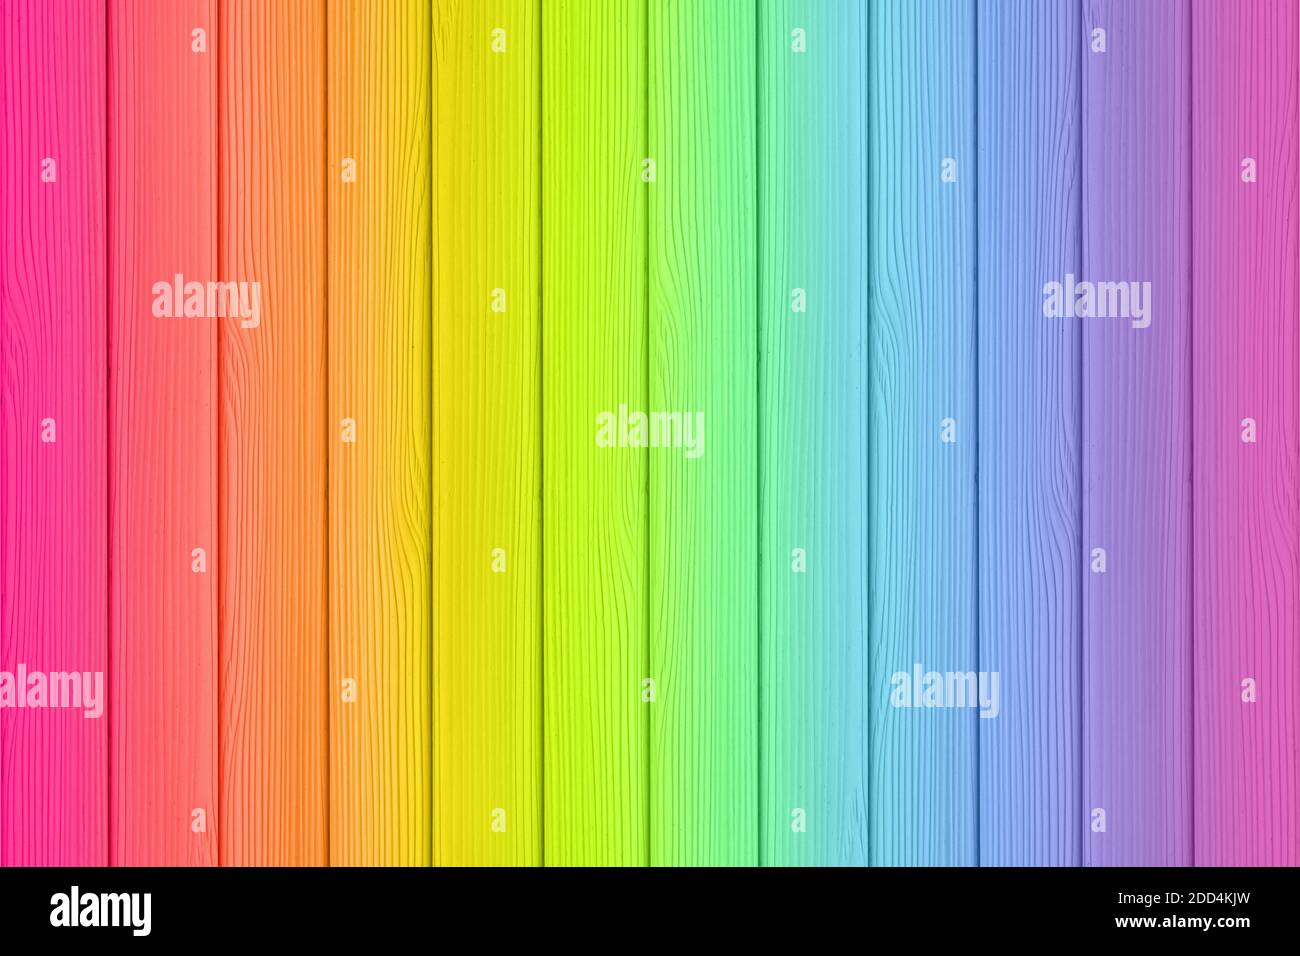 Wood rainbow colored texture as background, with copy space. Stock Photo